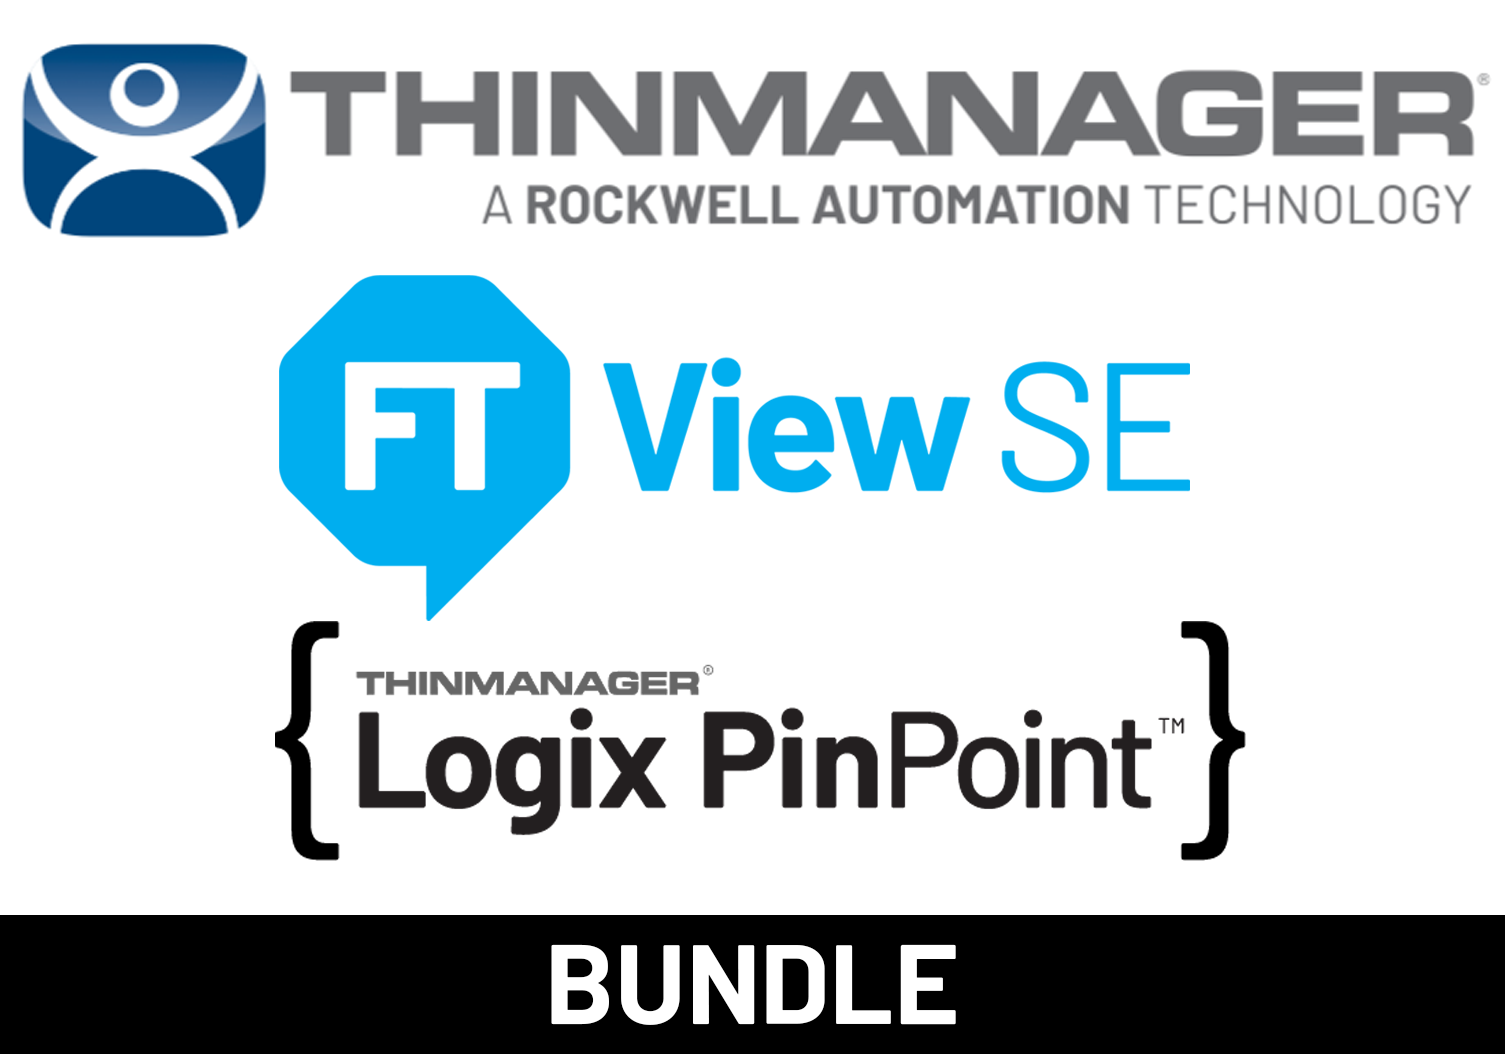 ThinManager + FactoryTalk View SE Perpetual + Maintenance